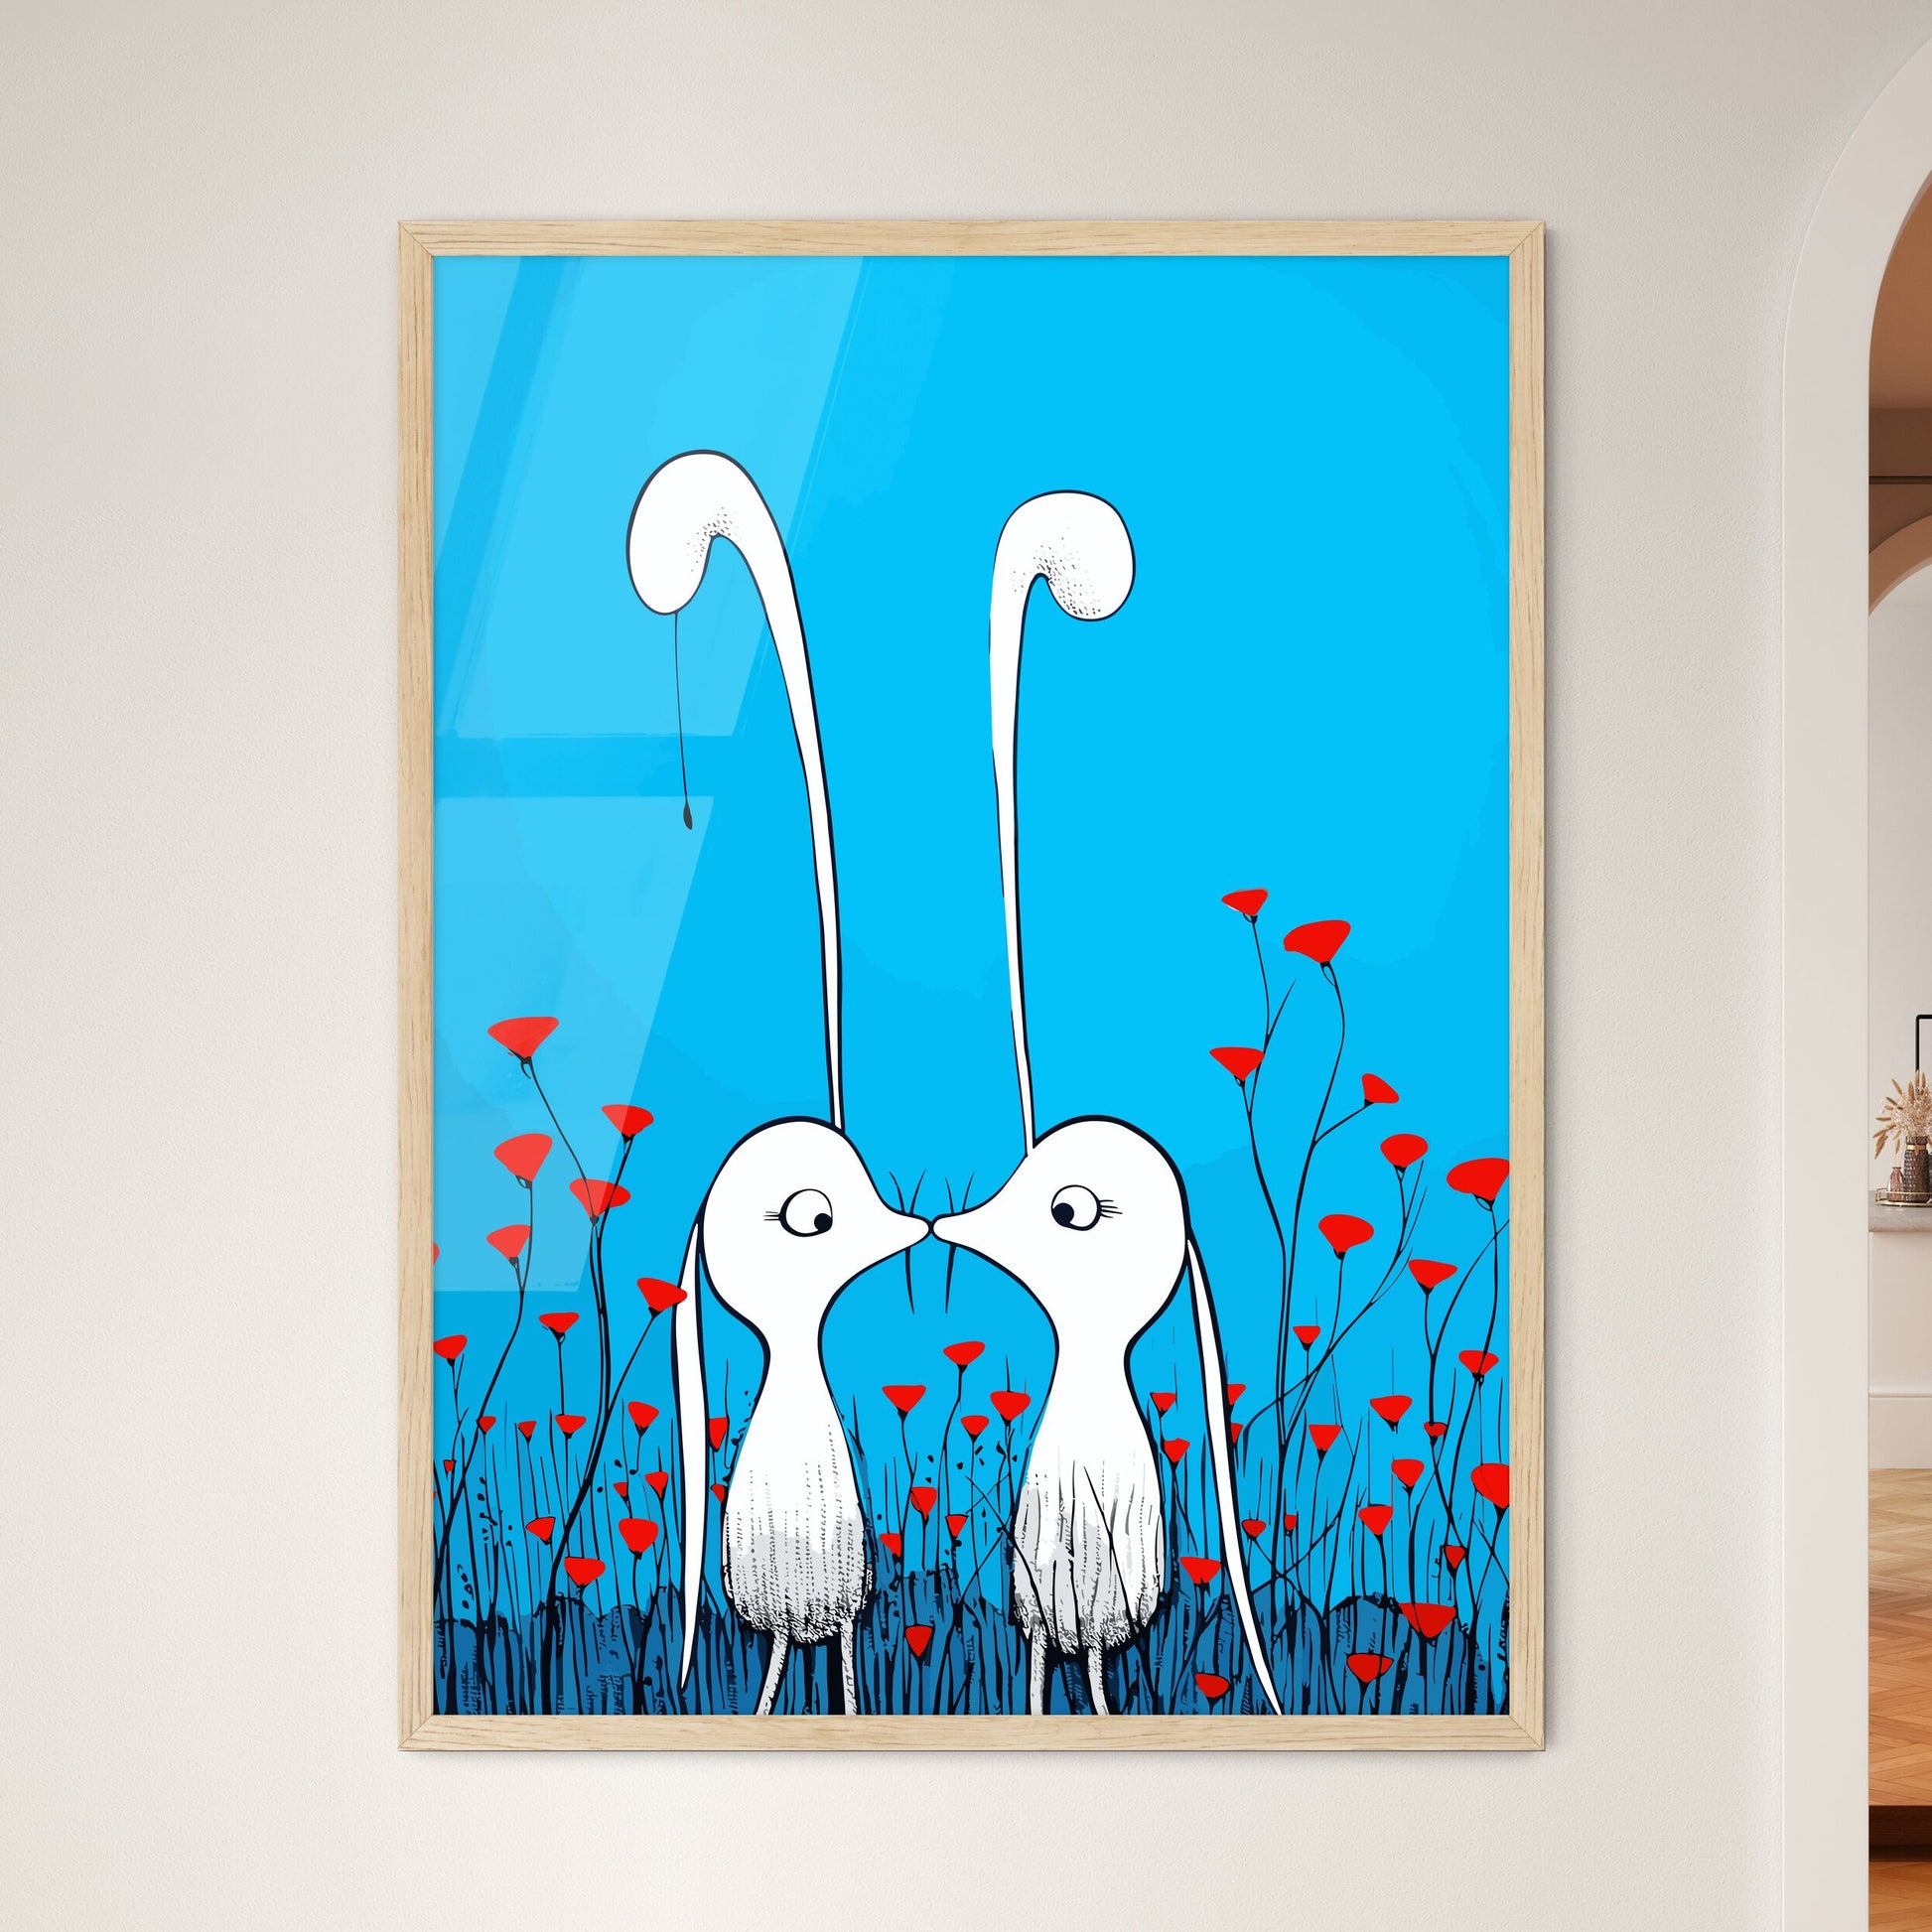 Cute Cute Bunnies In Love - Cartoon White Rabbits Kissing In A Field Of Red Flowers Default Title